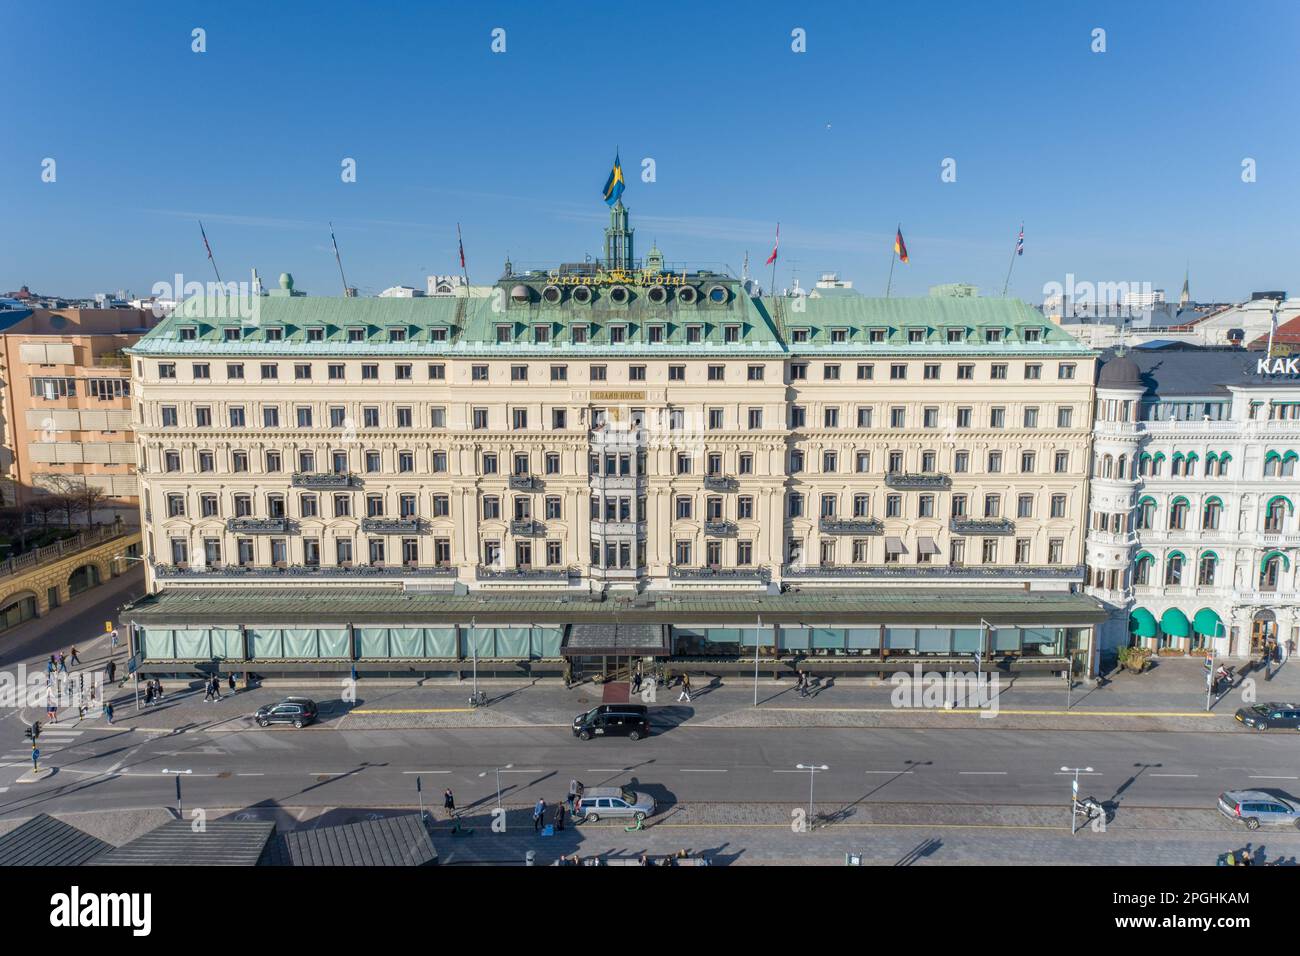 Grand Hotel Palace in Stockholm, Sweden Stock Photo